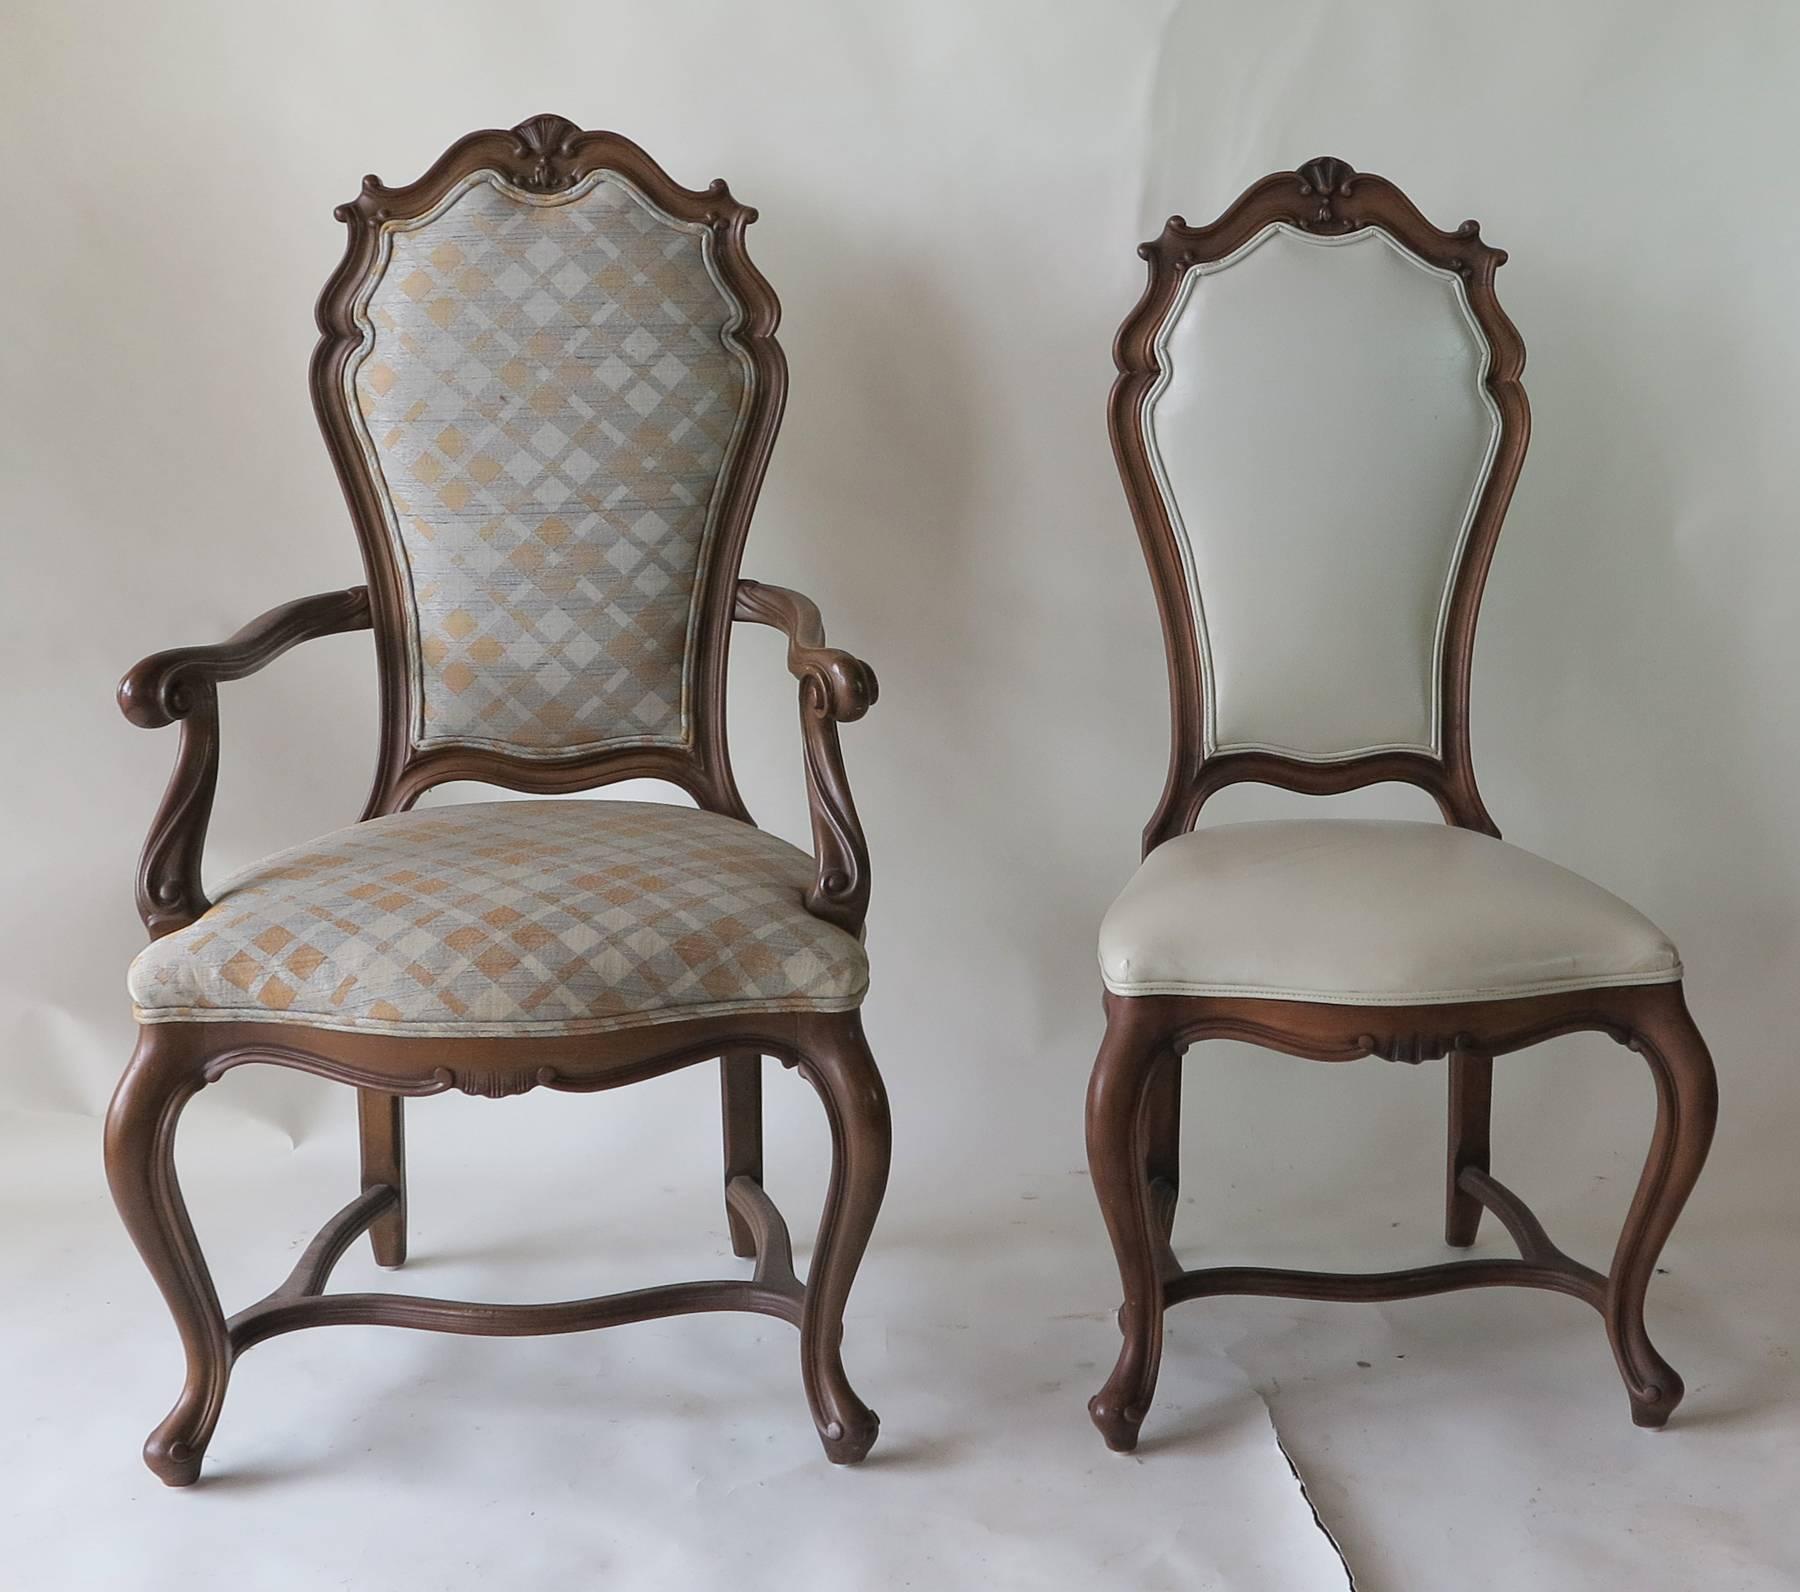 Six Karges Louis XV style dining chairs. In very good original condition. Show very little wear. From a house decorated in the 1980s. Upholstery in very good condition. 24 wide by 24 deep by 43 high seat height 19 inches.